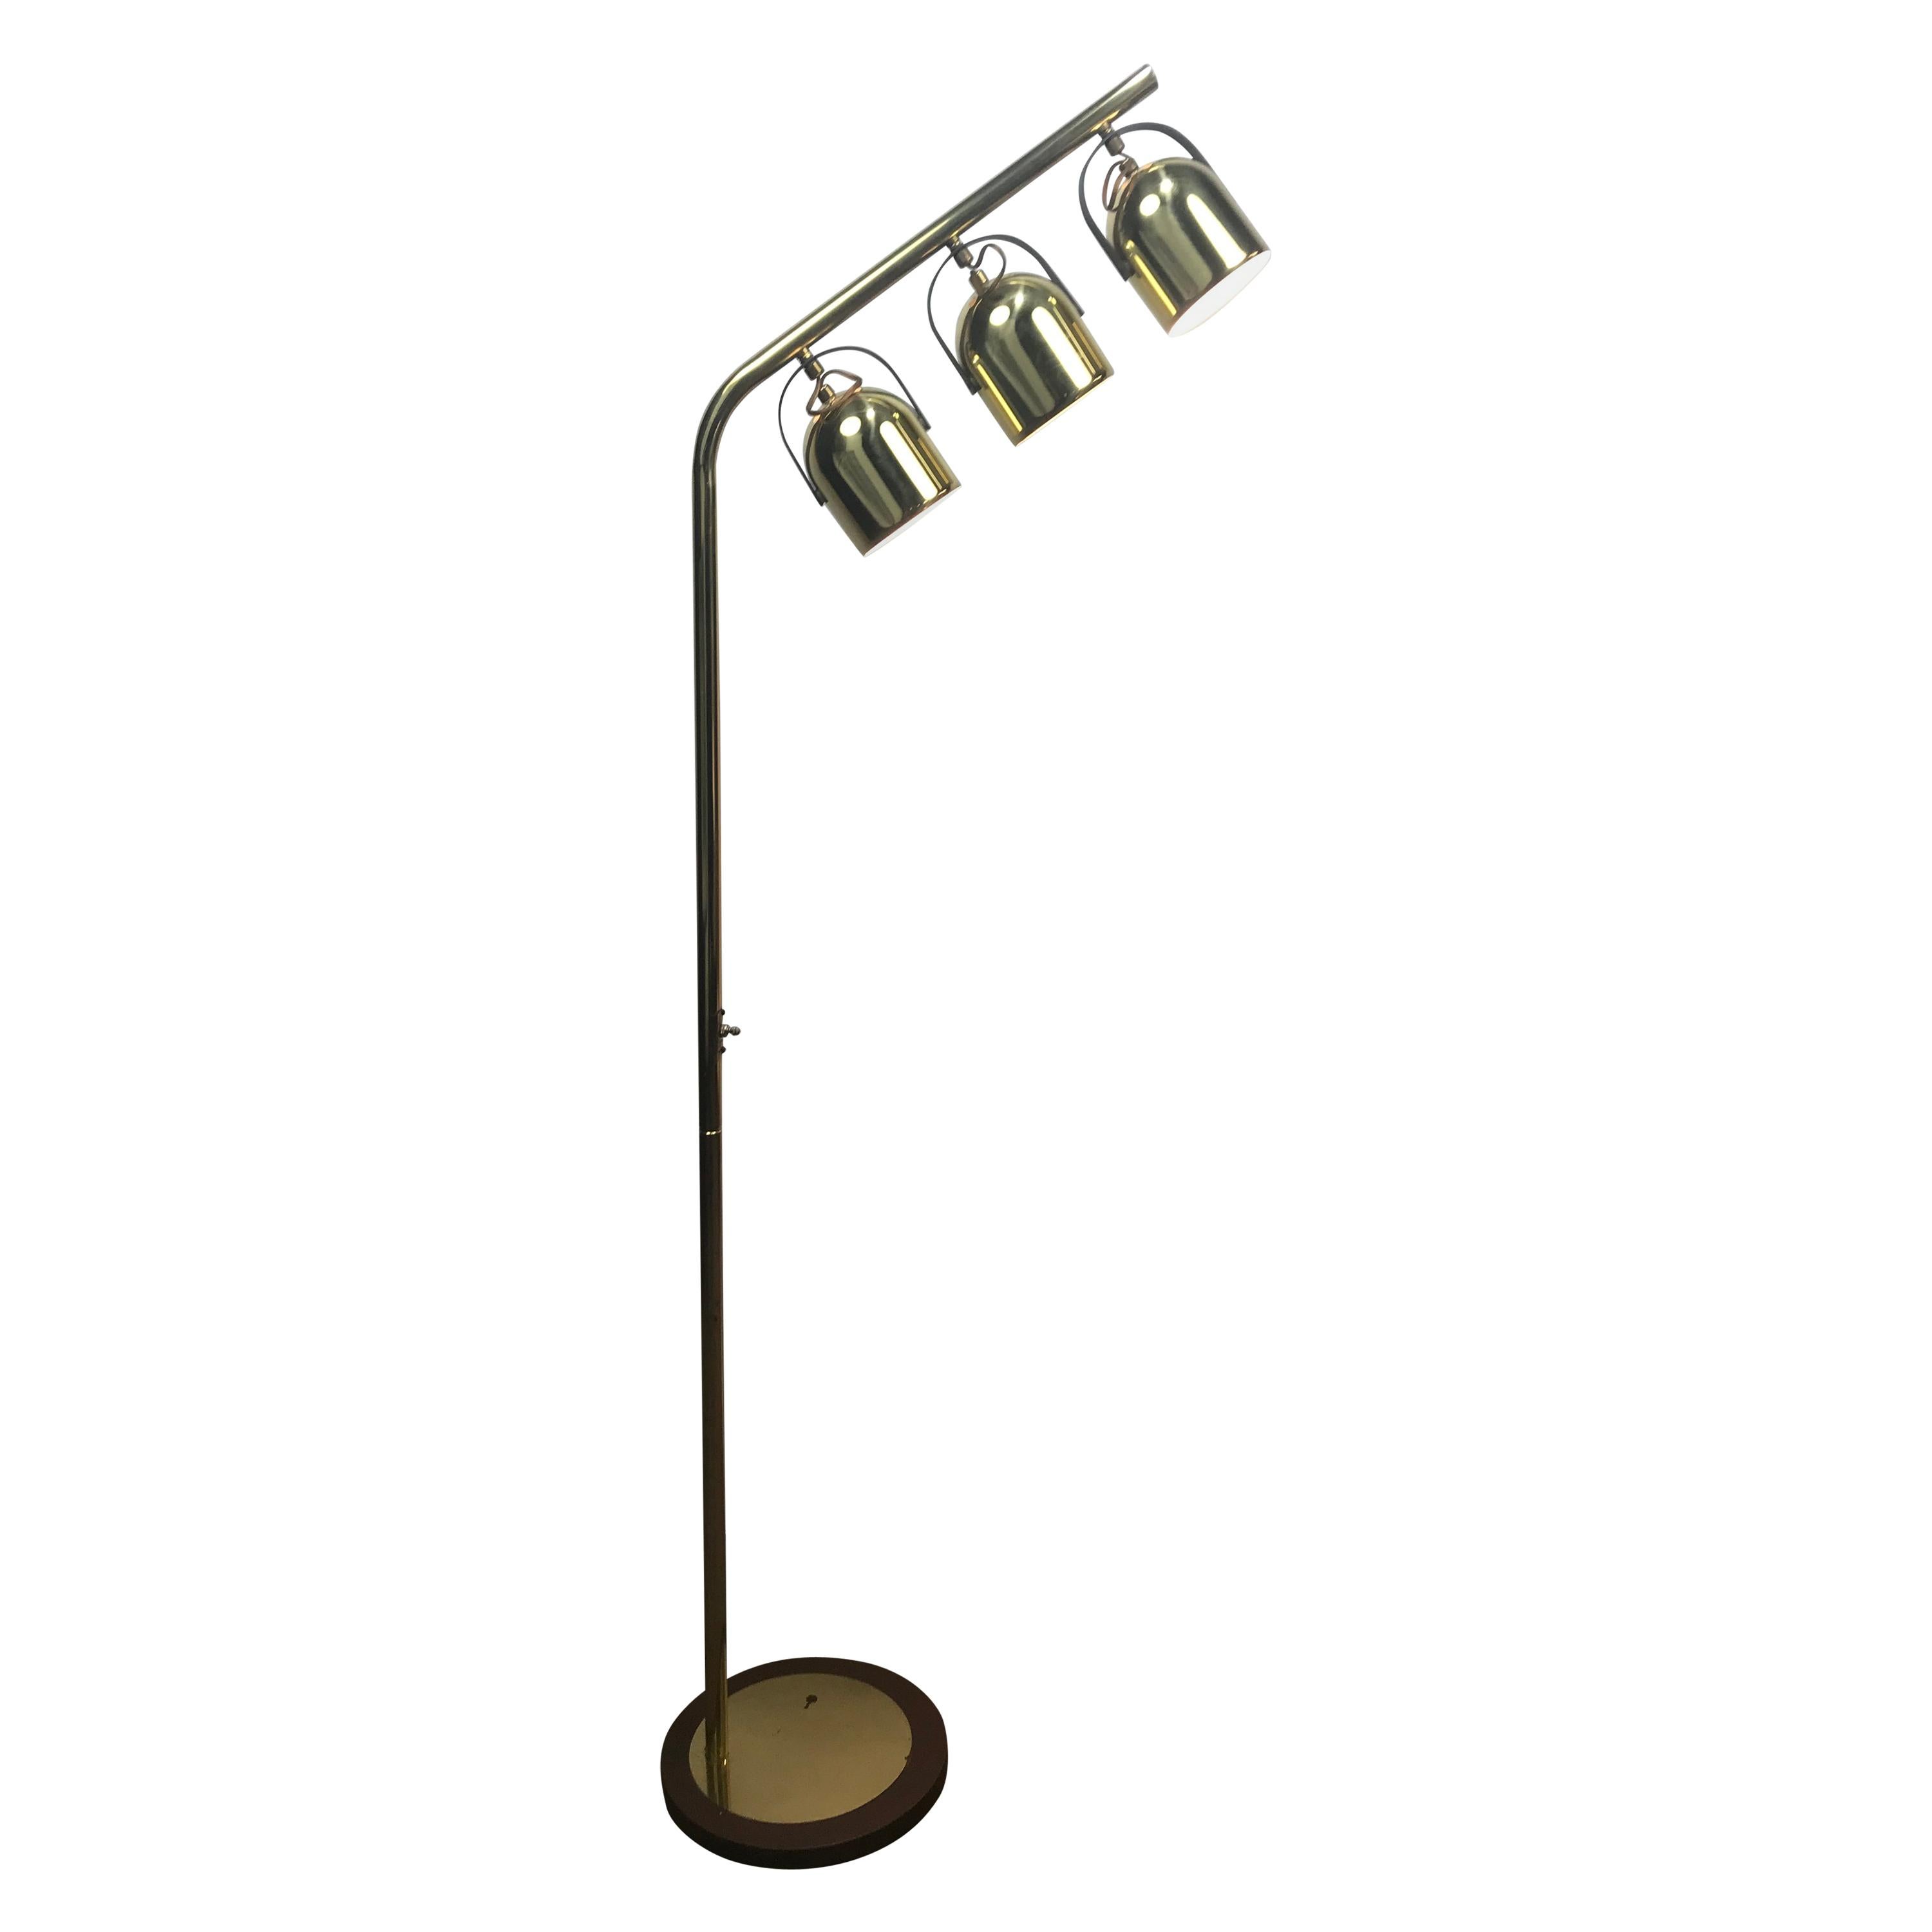 Midcentury Space Age Brass Floor Lamp with Three Pivoting Head after Regggiani